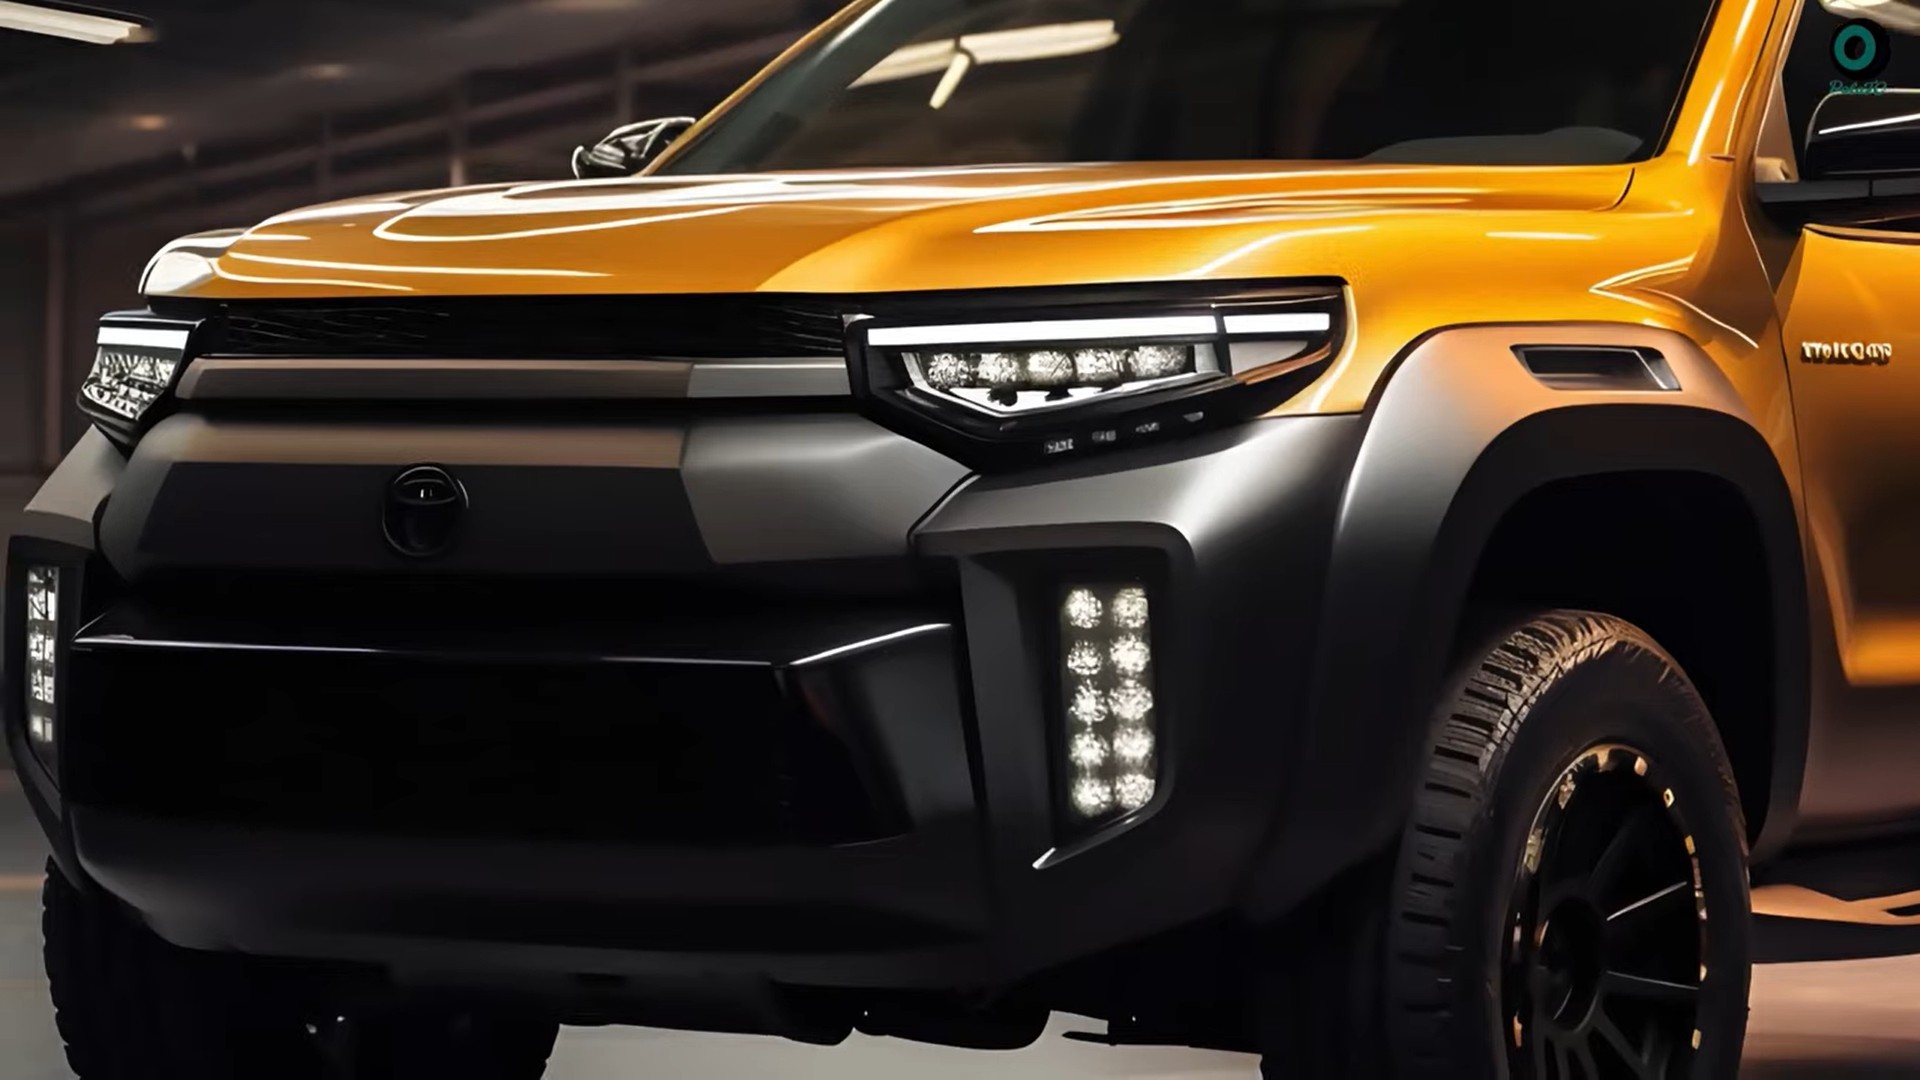 2025 Toyota Stout Revival: Everything We Know So Far